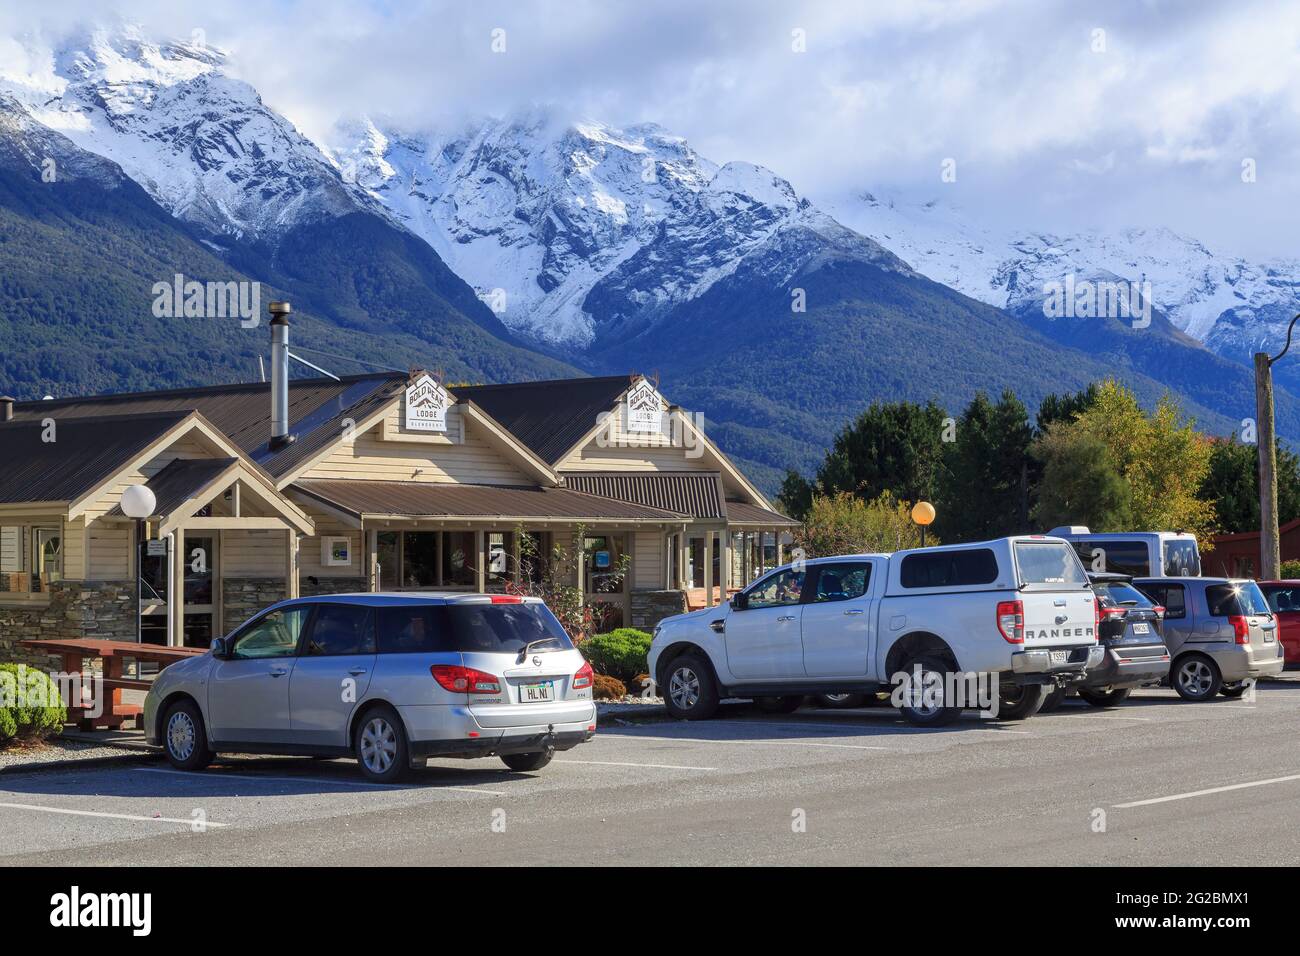 https://c8.alamy.com/comp/2G2BMX1/glenorchy-a-town-at-the-base-of-the-southern-alps-in-the-south-island-of-new-zealand-view-of-the-bold-peak-lodge-a-motel-2G2BMX1.jpg